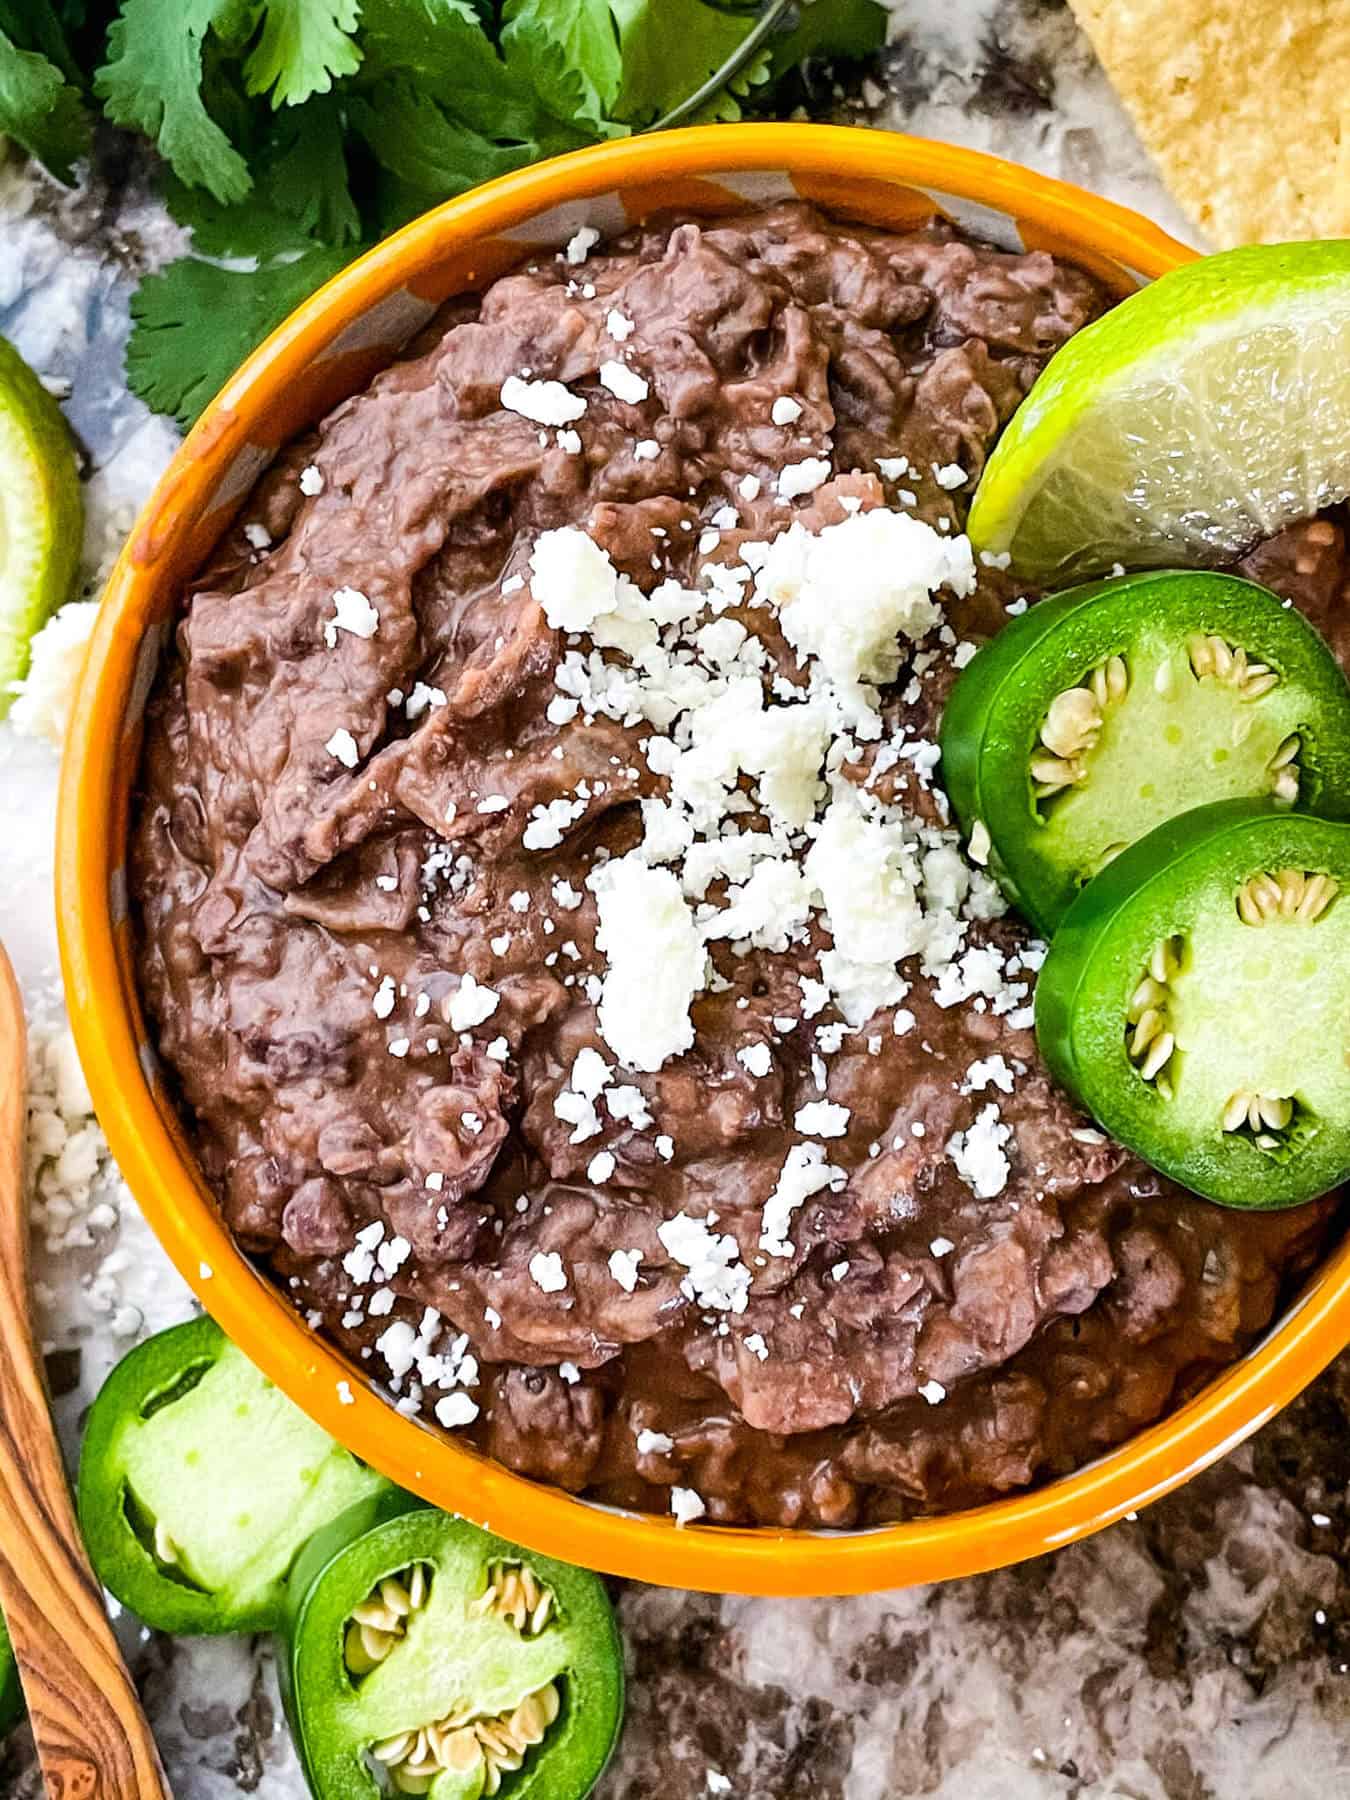 are old El Paso refried beans gluten free, Are Old El Paso Refried Beans gluten free?